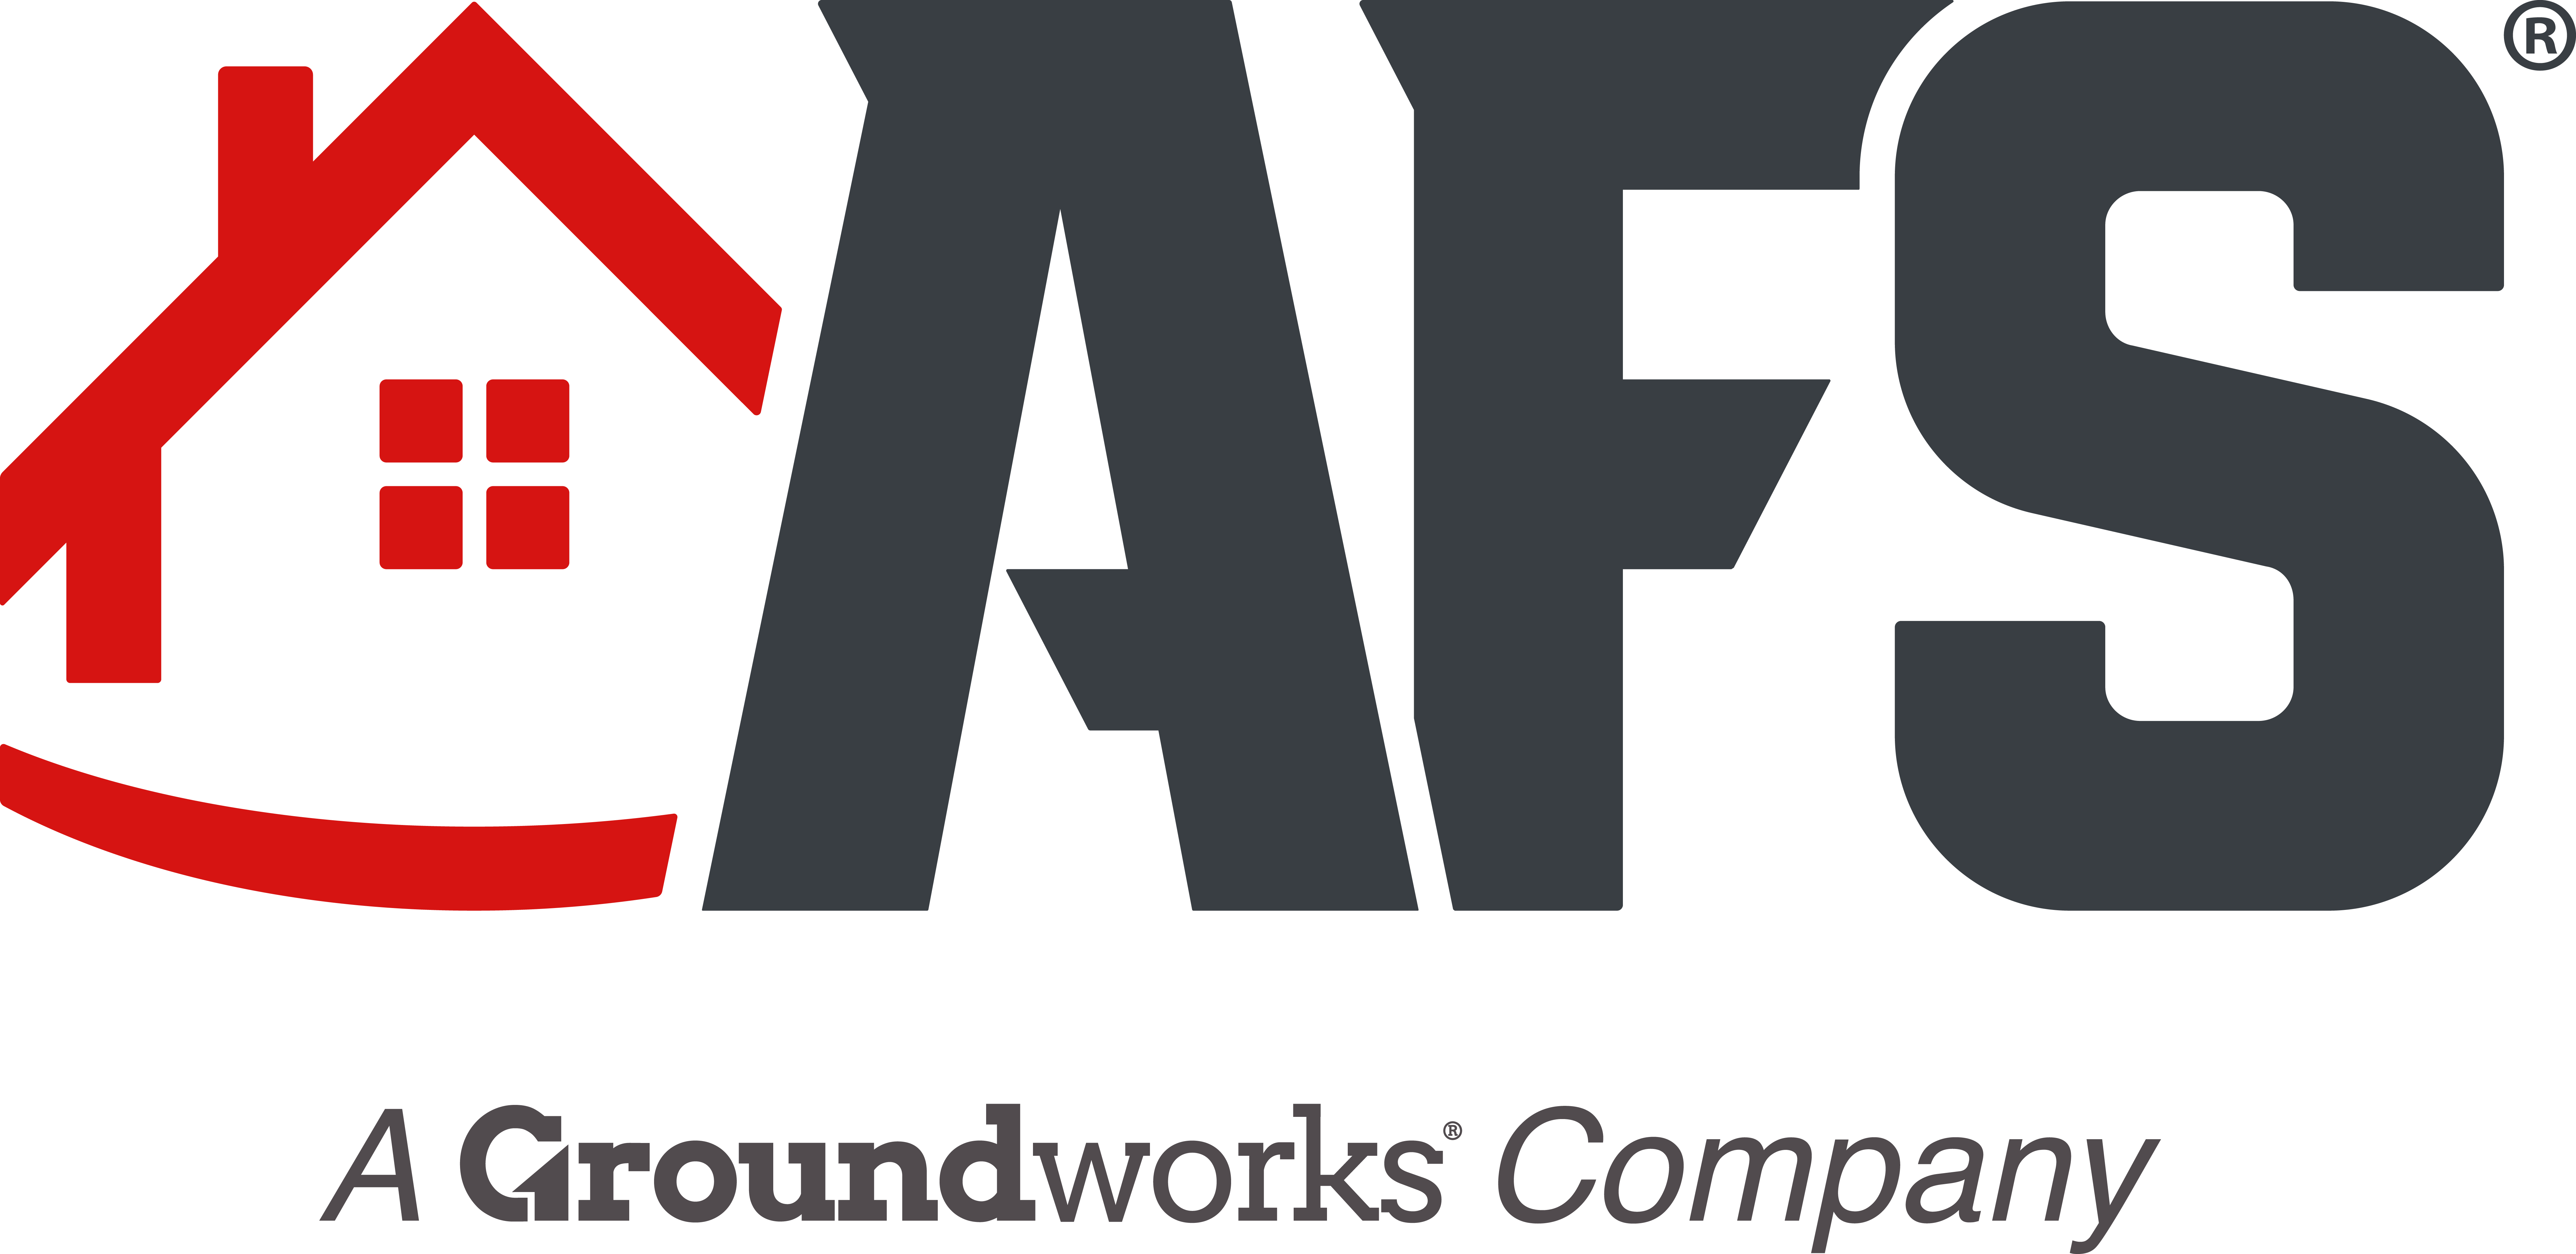 AFS Foundation & Waterproofing Specialists Logo